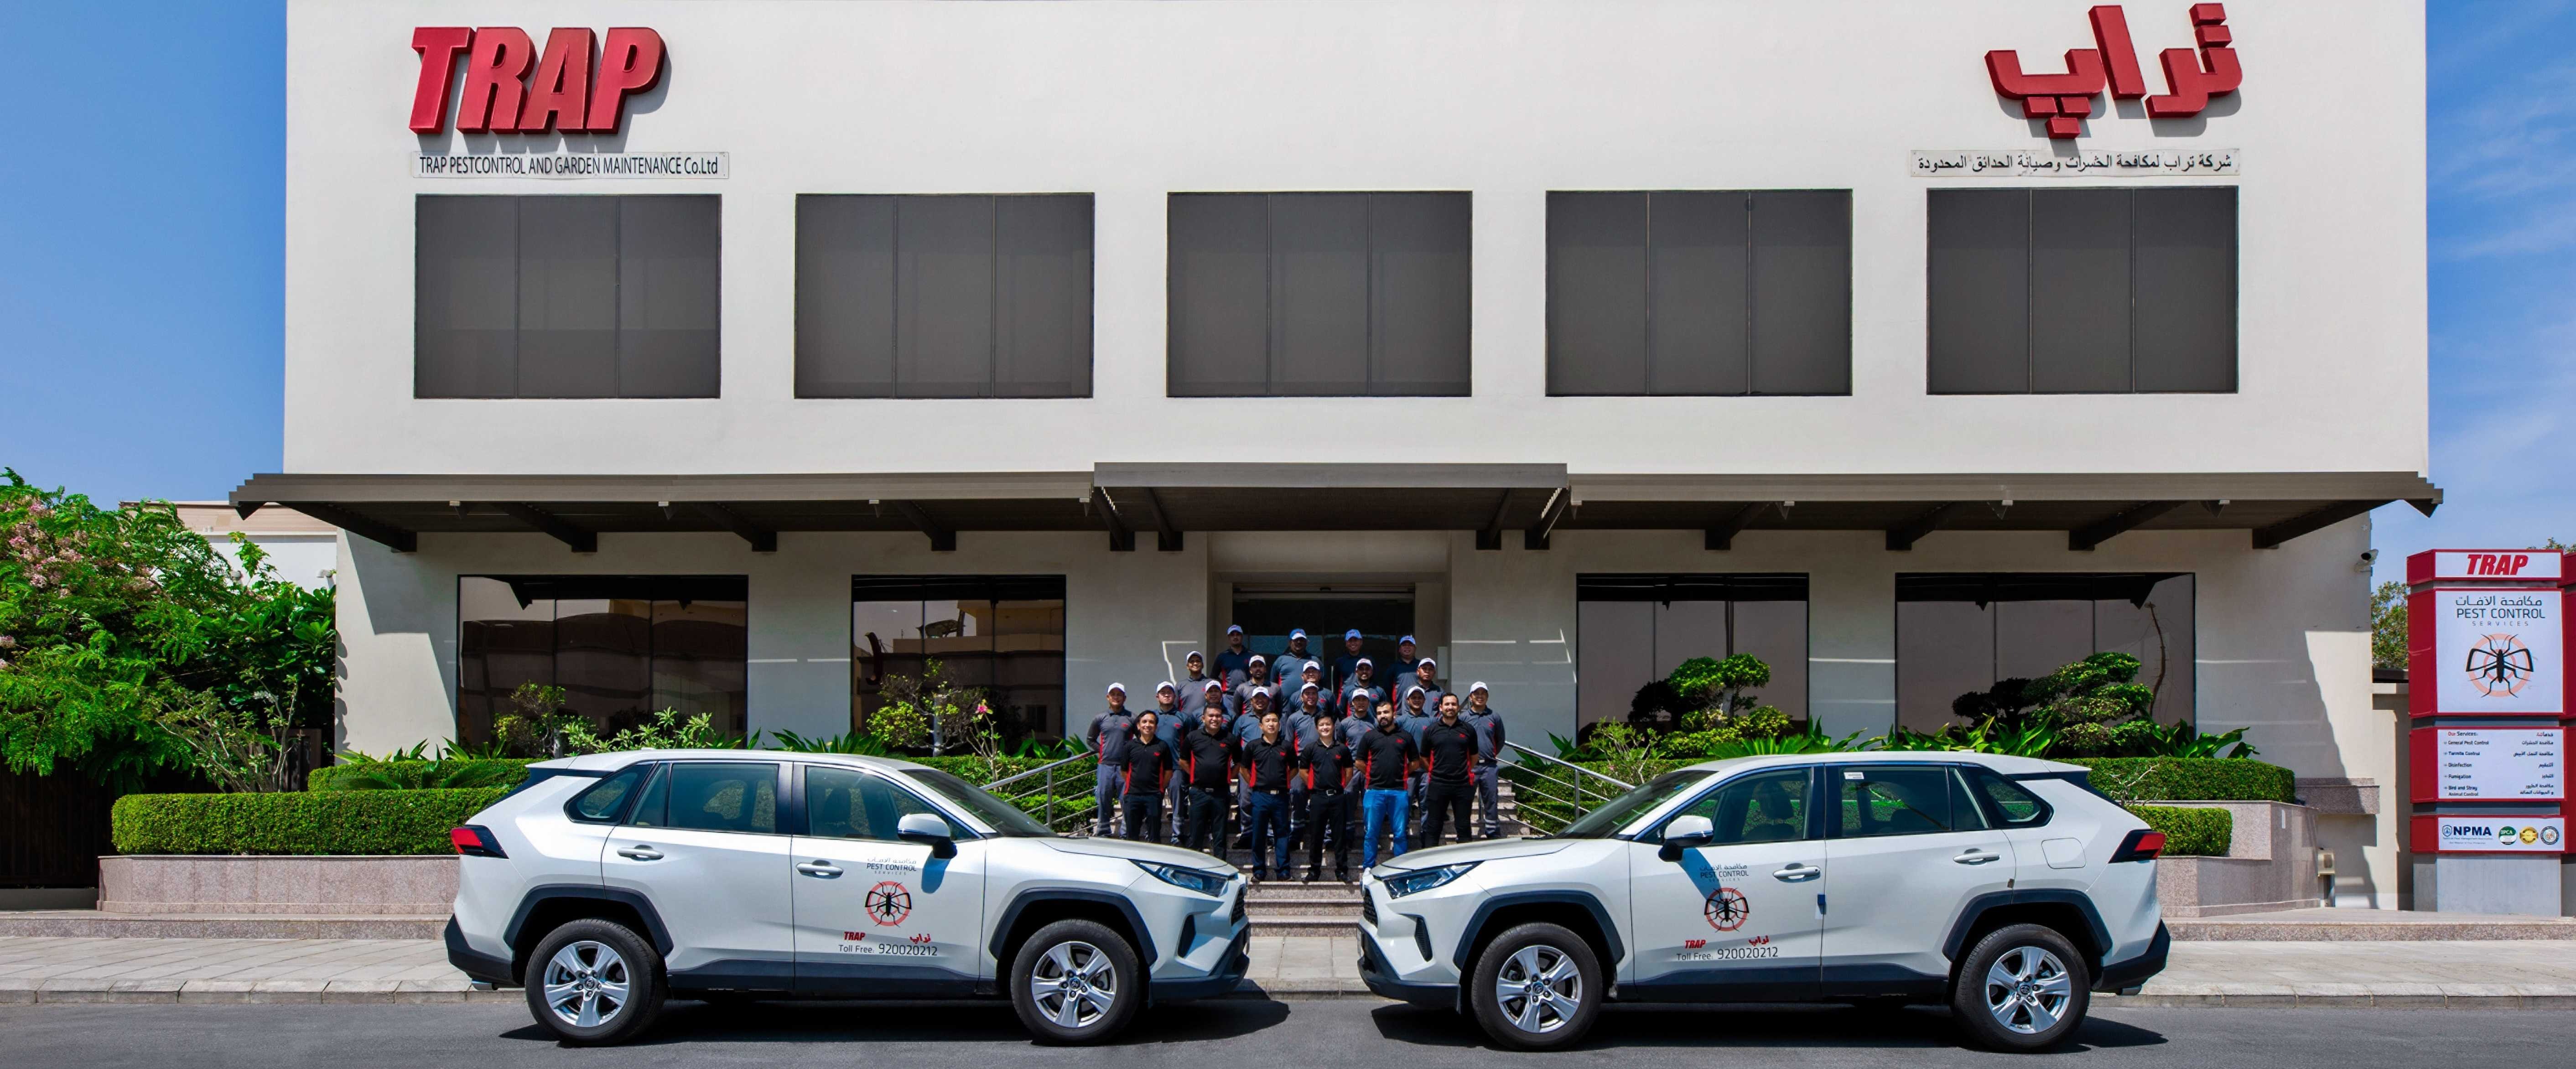 TRAP Pest control employees in front of the company premises